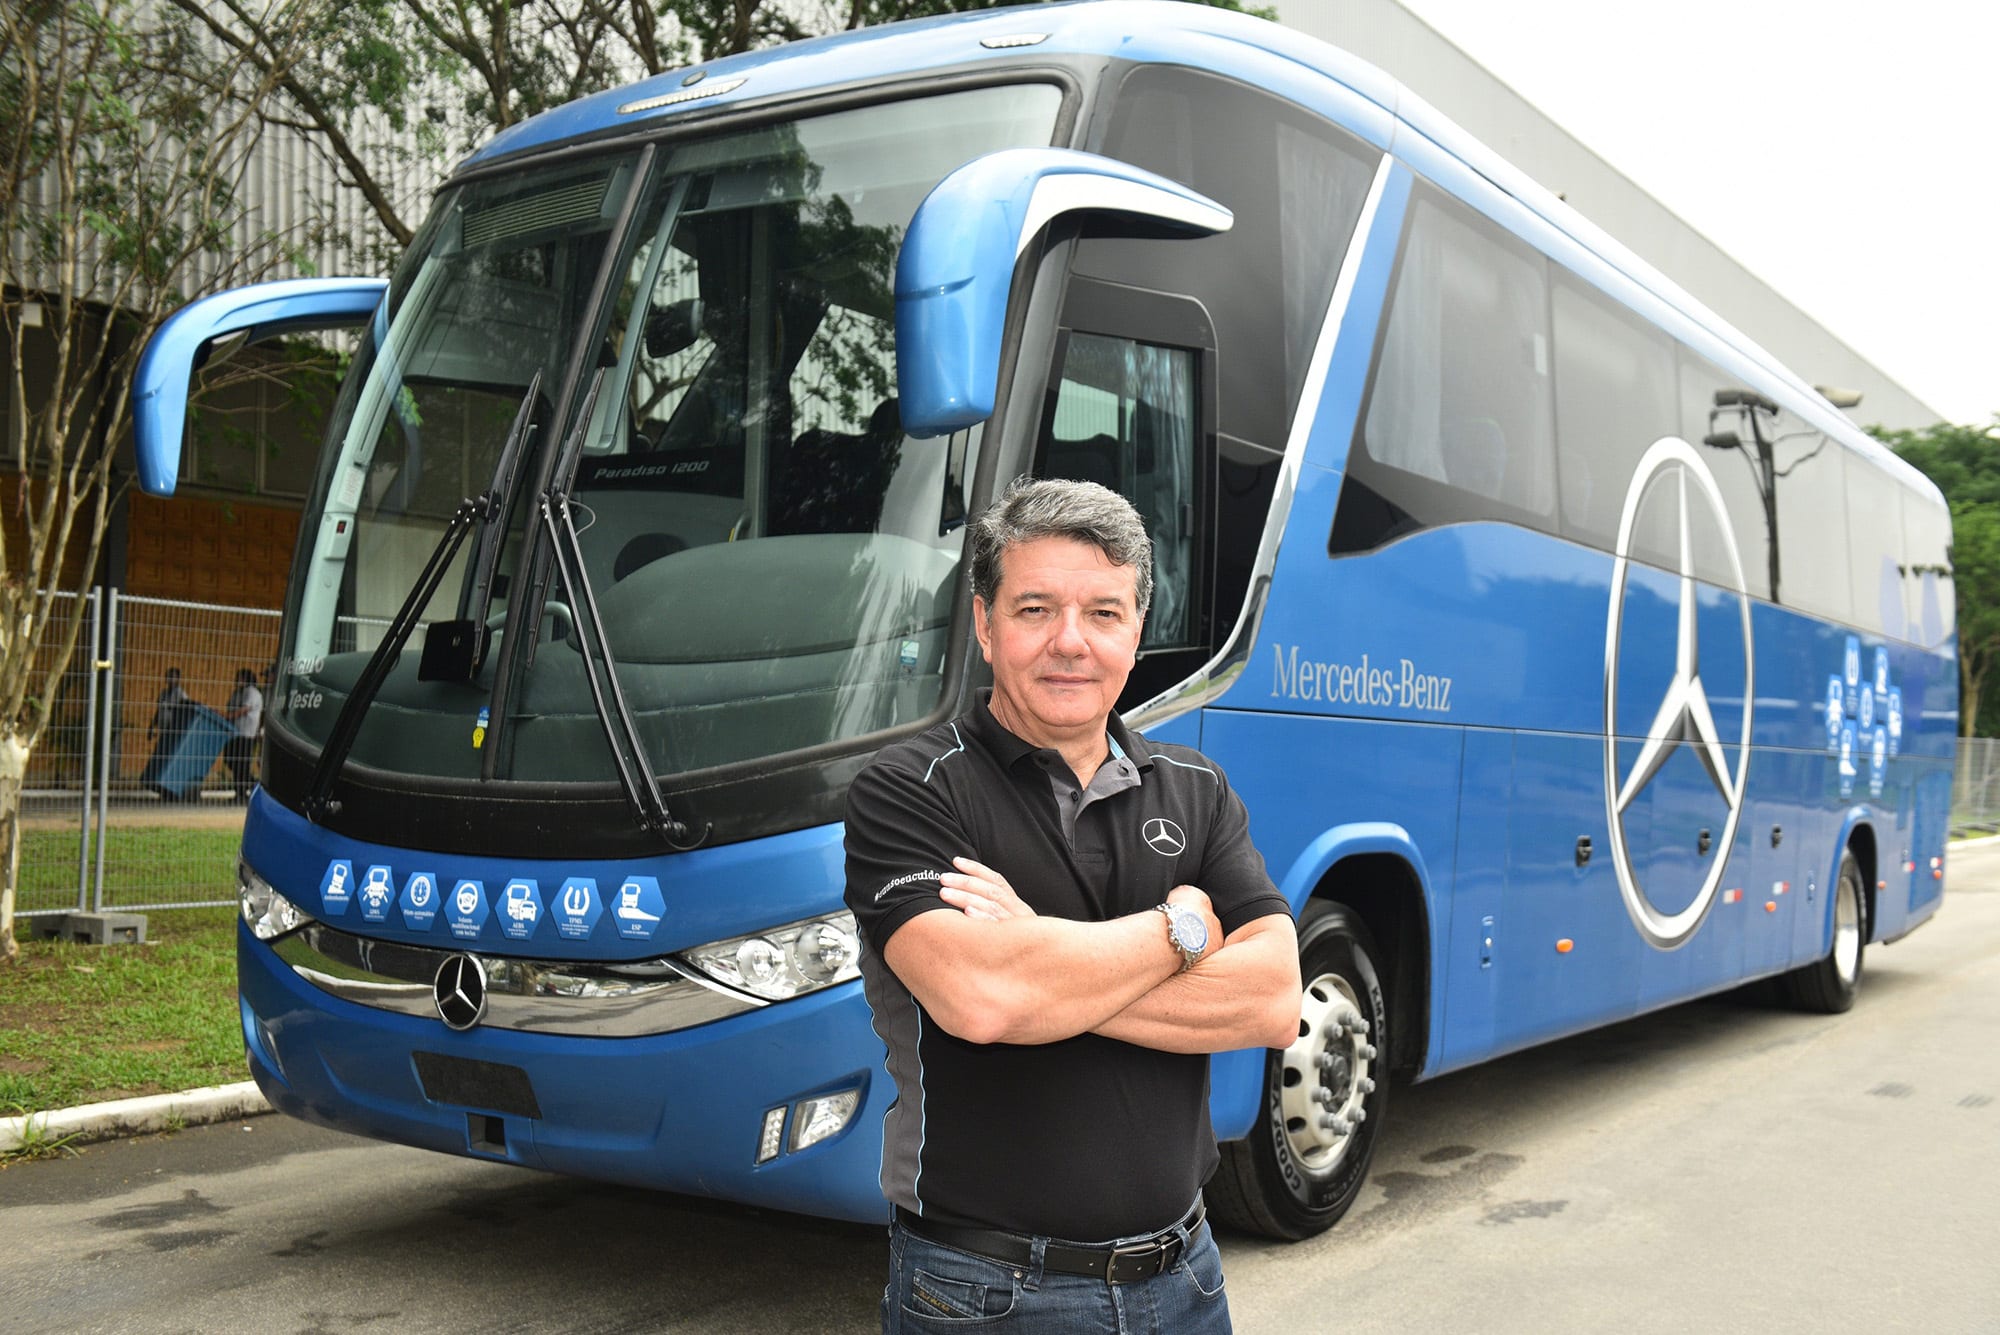 Mercedes Benz do Brazil to export 500 buses to Nigeria